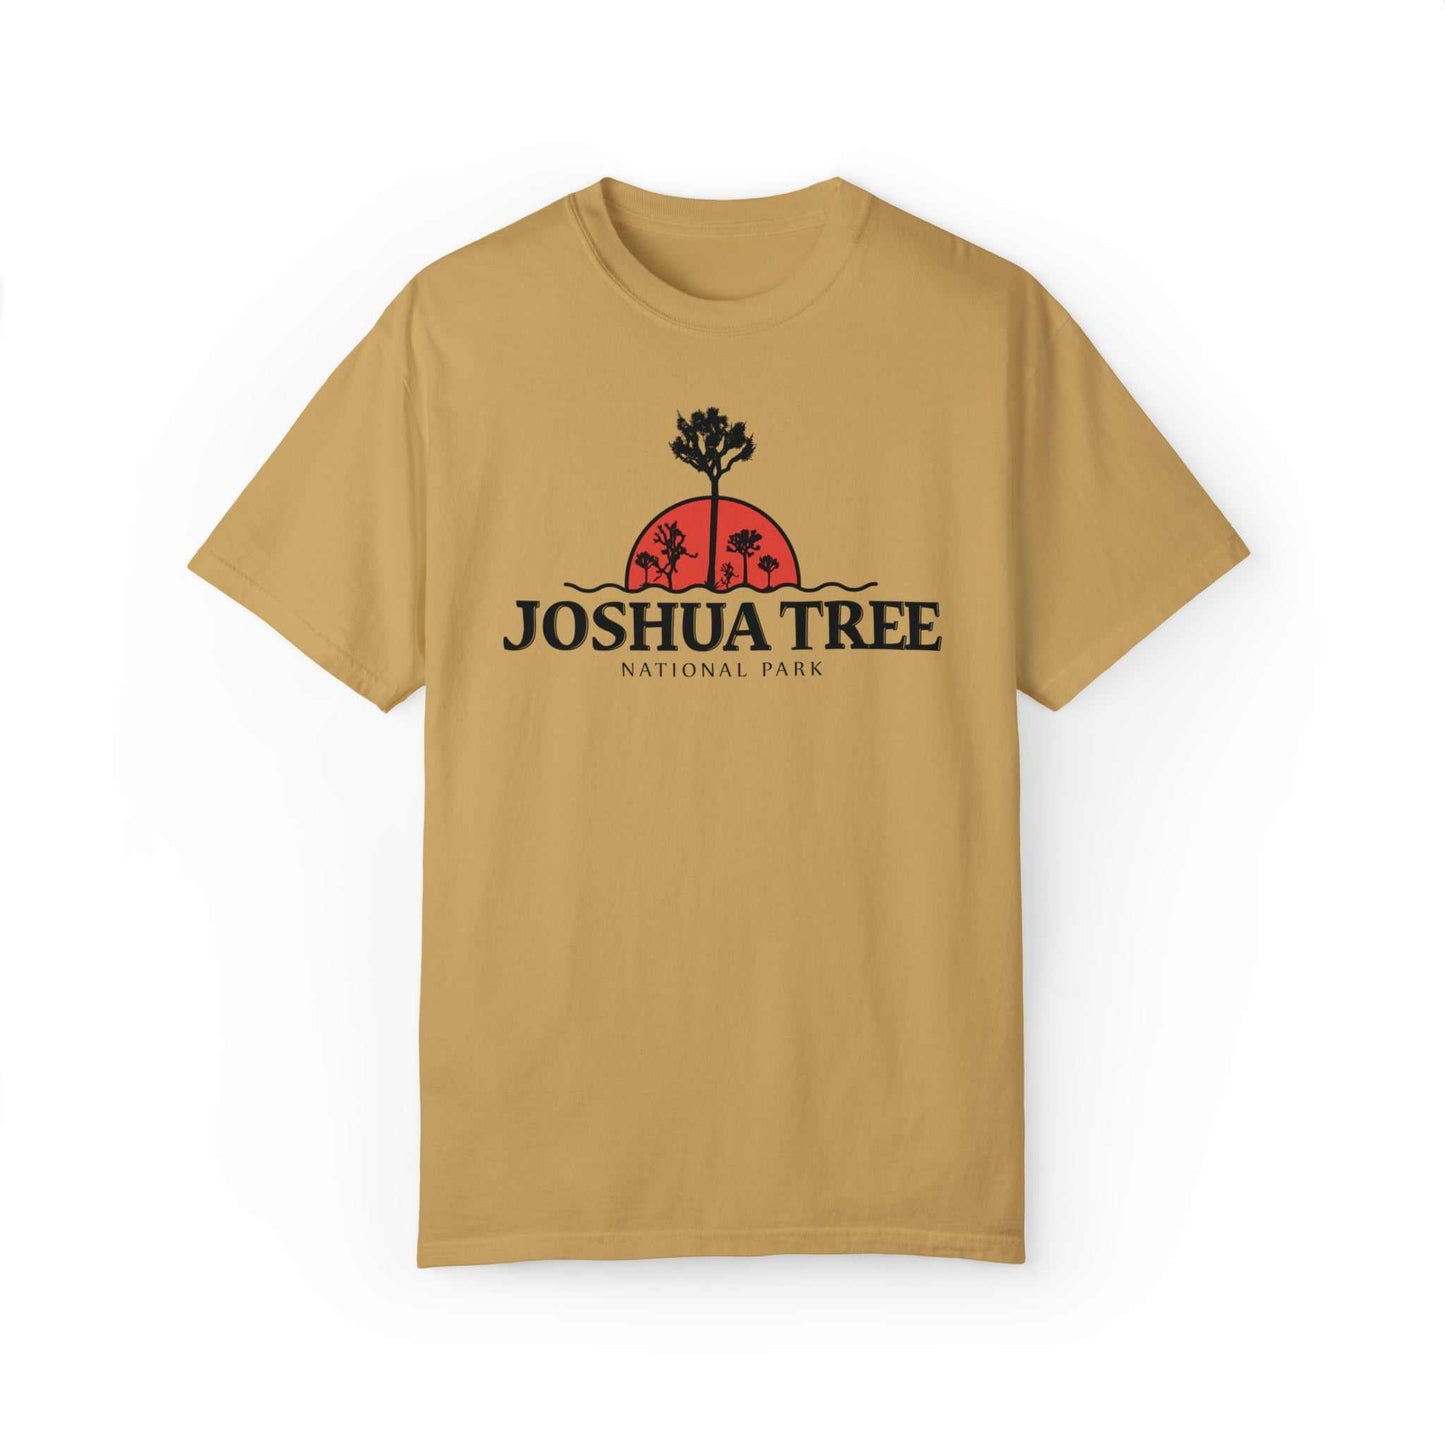 90s Joshua Tree National Park ShirtBring back the vibe on your next outdoor outing with this 90s vintage styled Joshua Tree National Park Graphic Tee. - soft and lightweight cotton - unisex sizing
The